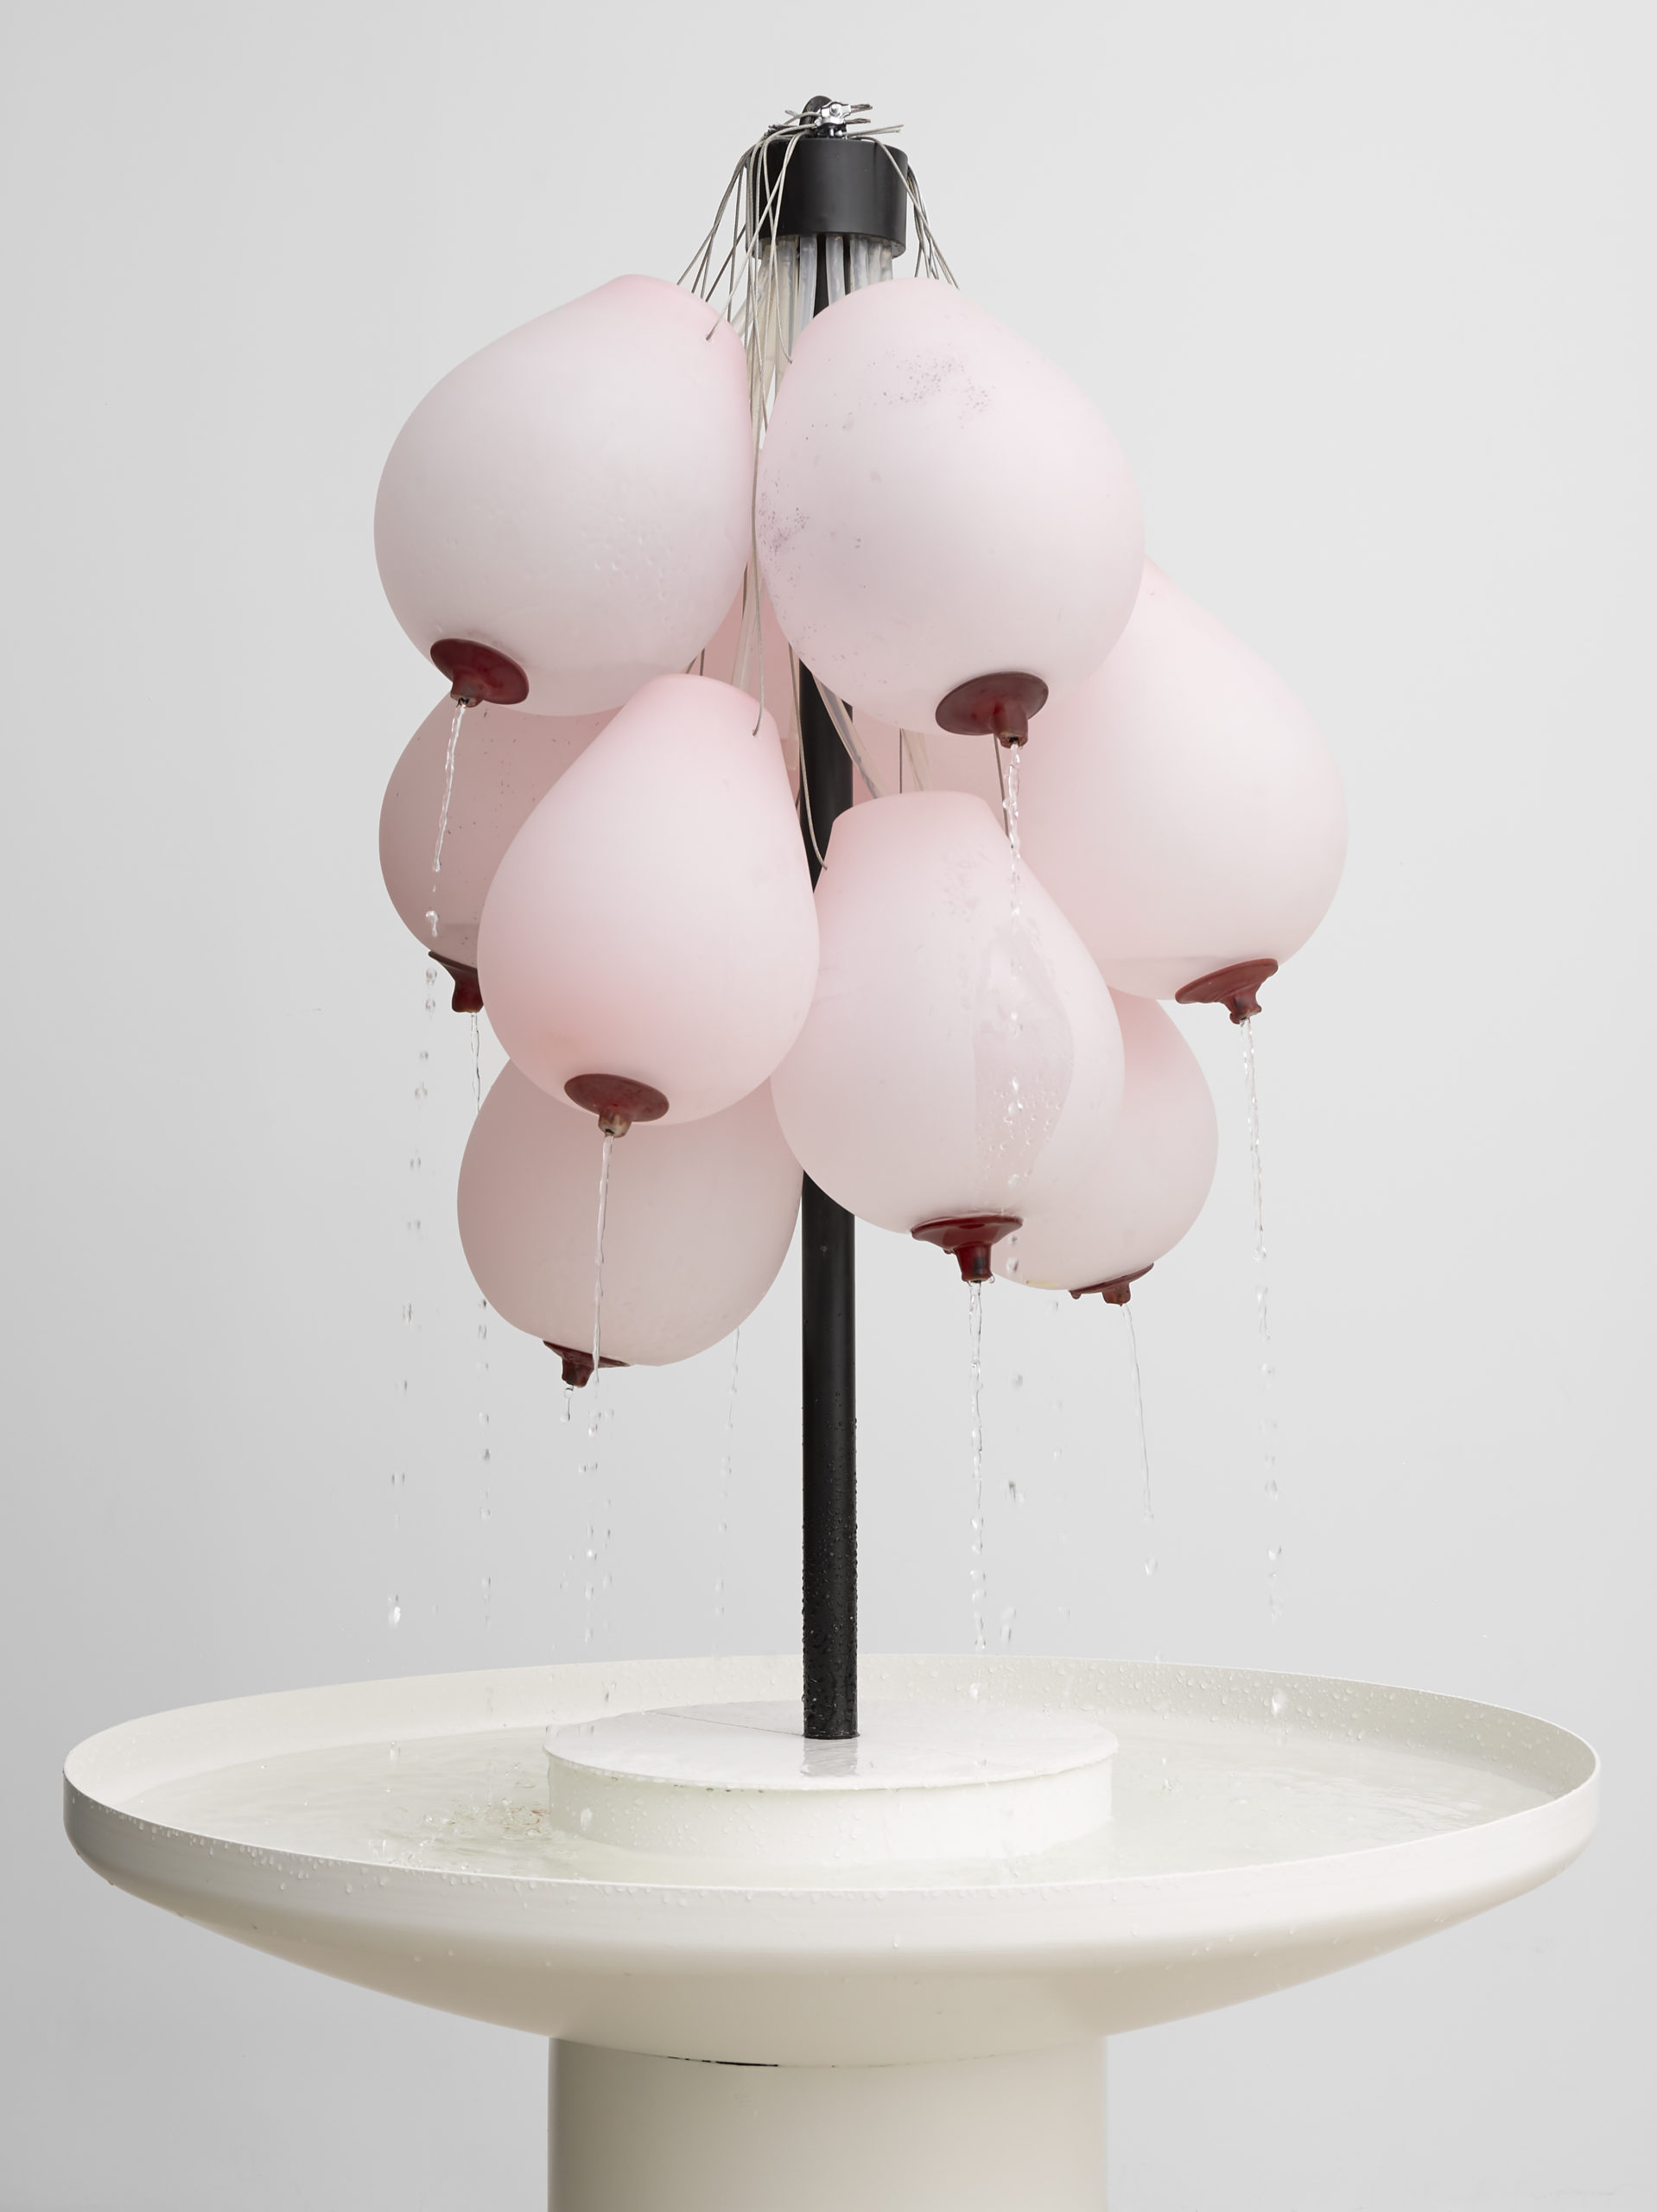 Laure Prouvost, We Will Feed You, Cooling Fountain (For Global Warming), 2018